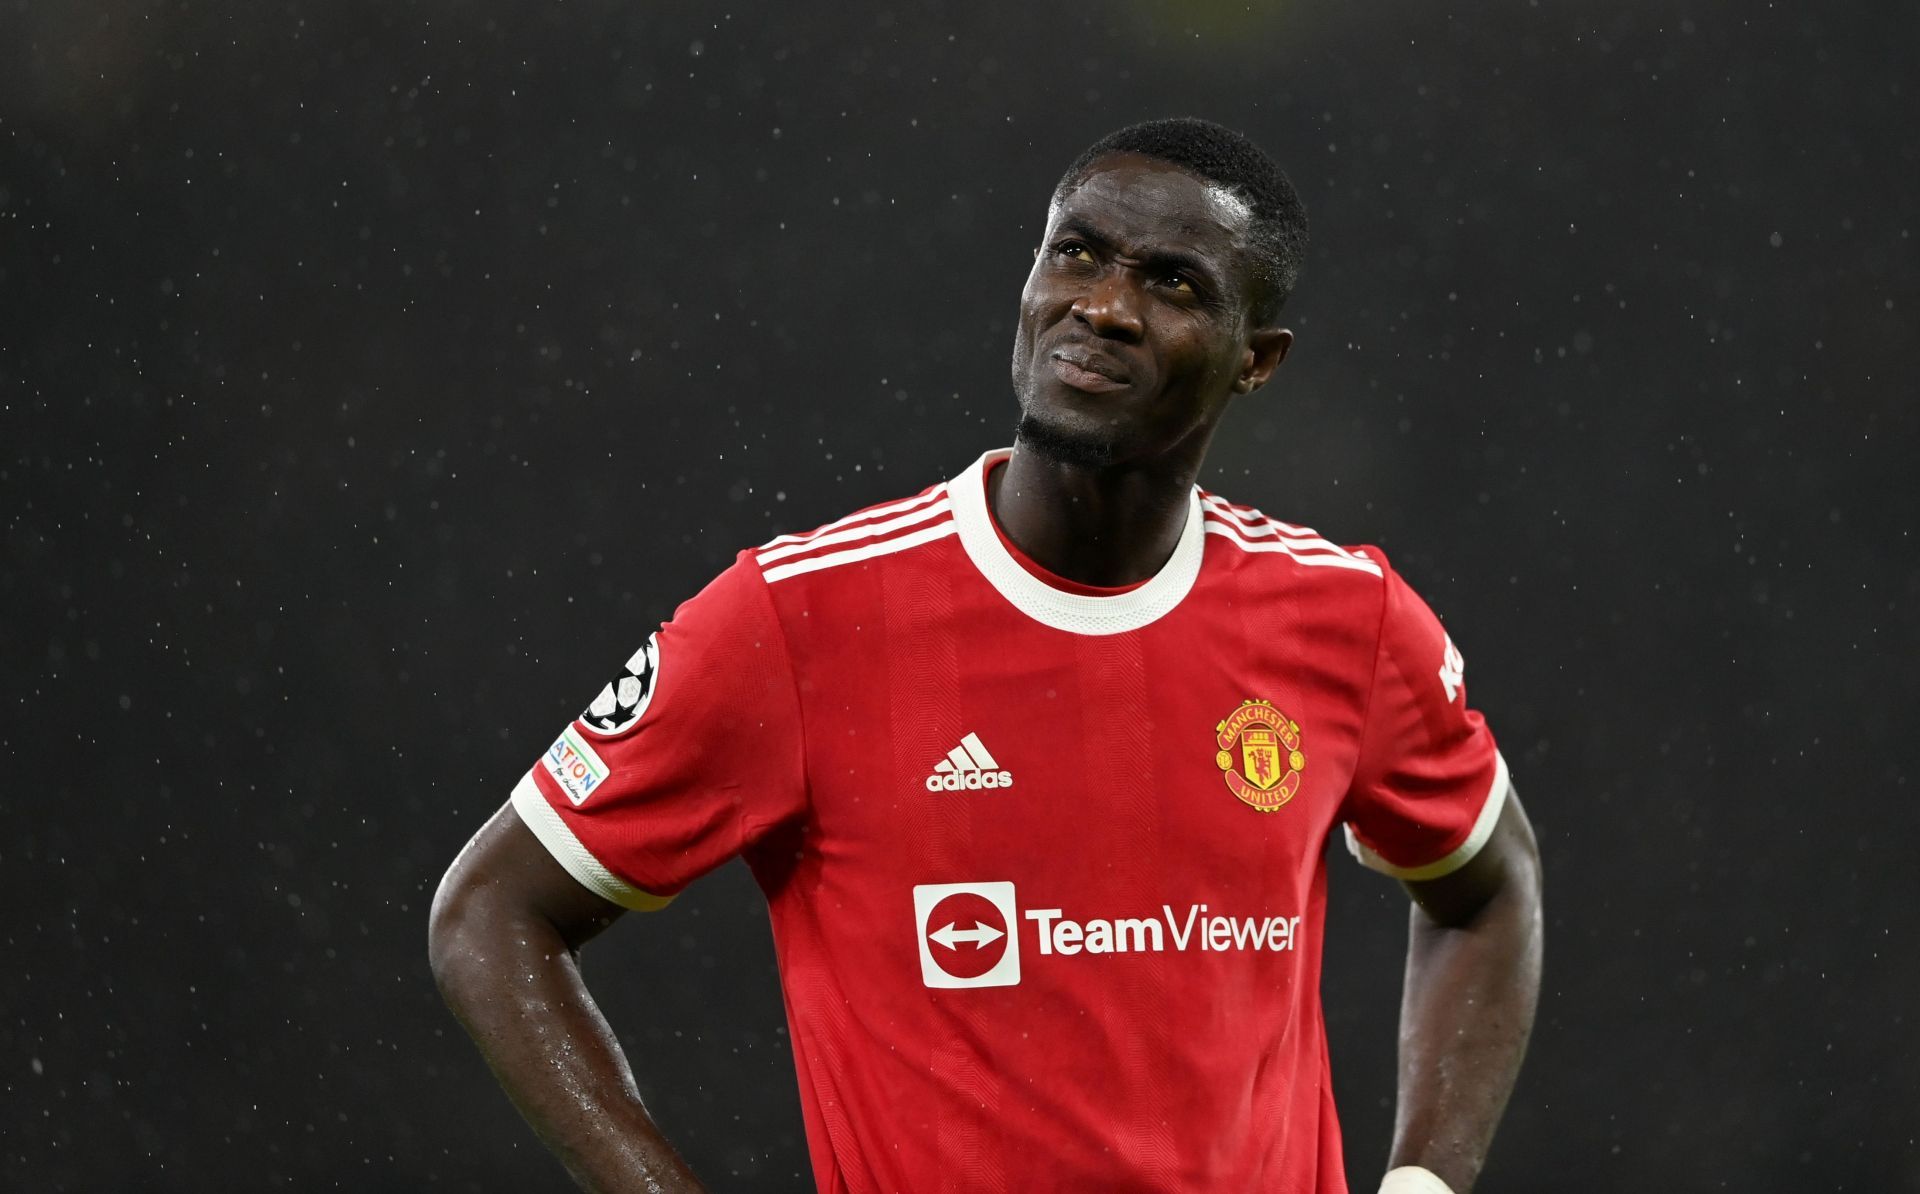 Eric Bailly is likely to depart Old Trafford this summer.